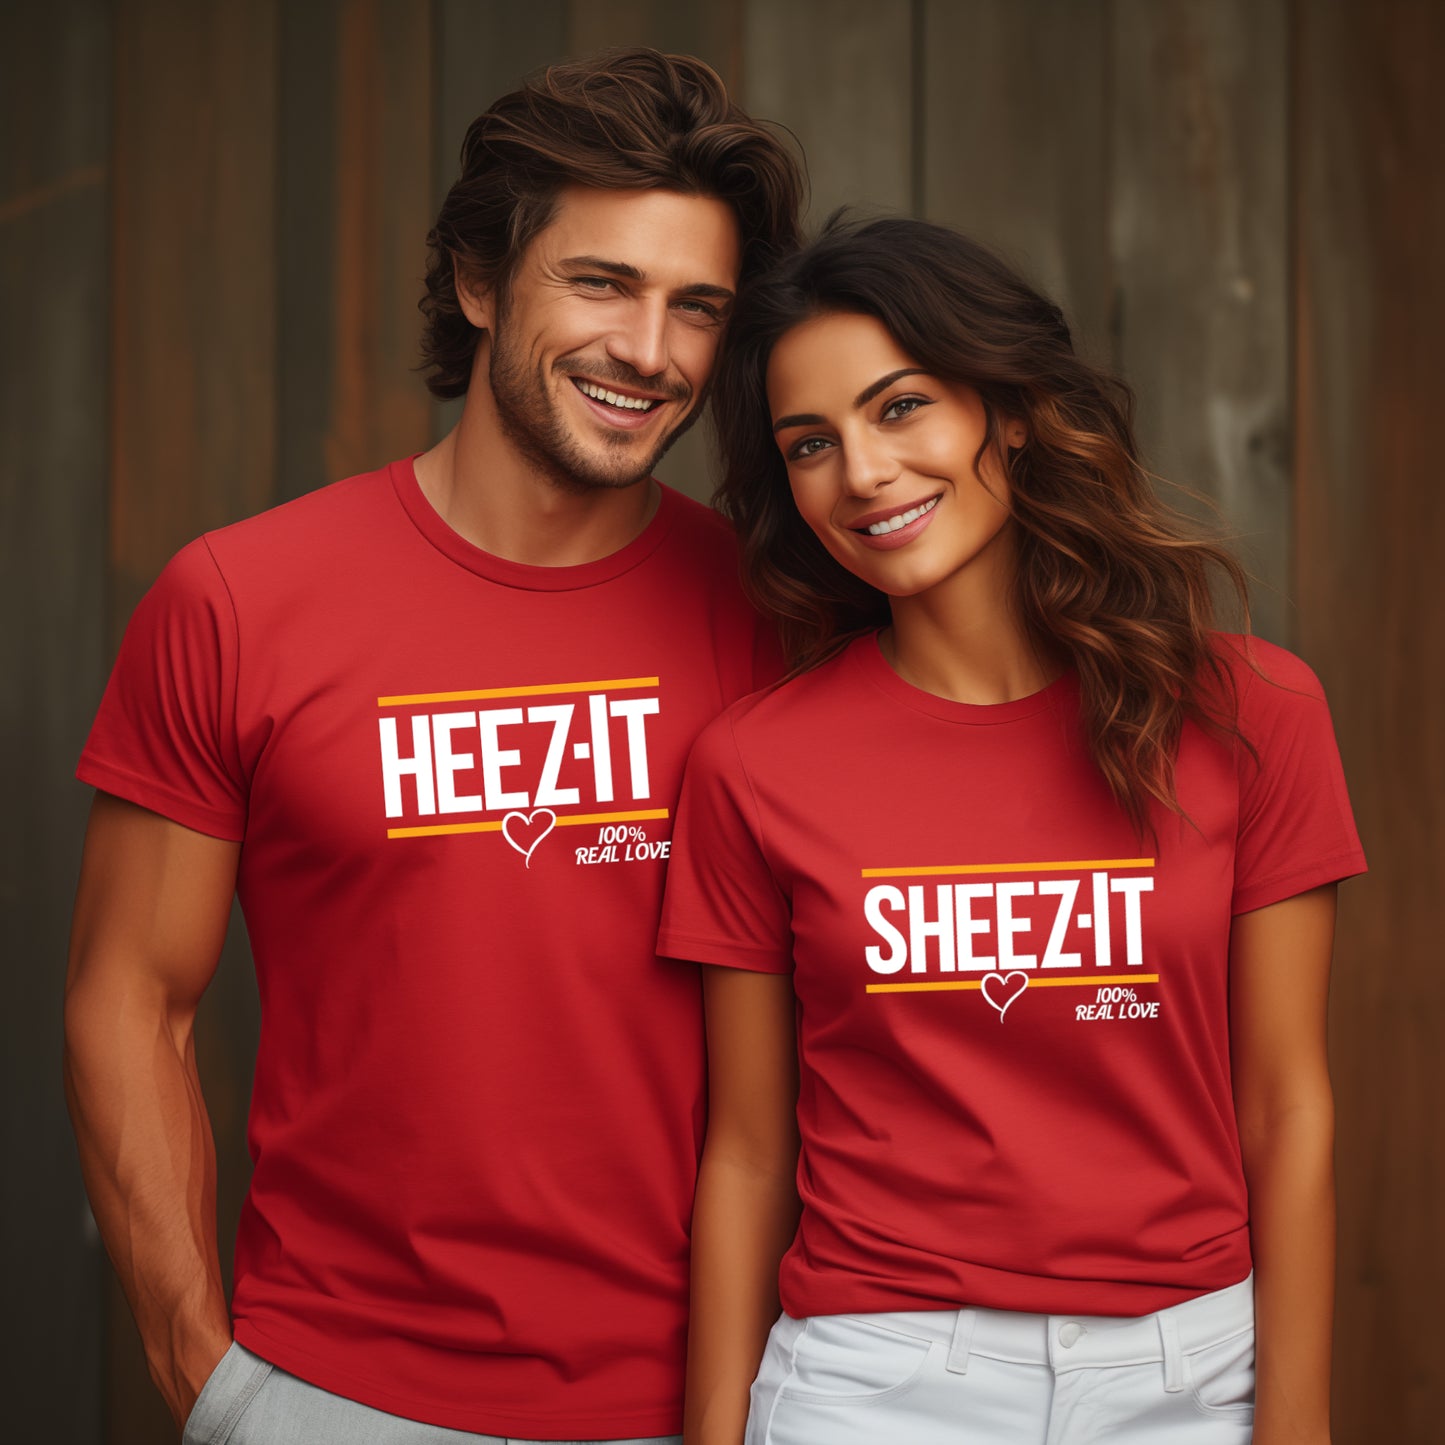 Sheez-It Heez-It matching Tshirts for couples, Valentines Gift for Him and Her, Anniversary gift, Birthday gift for him, Christmas gift for him